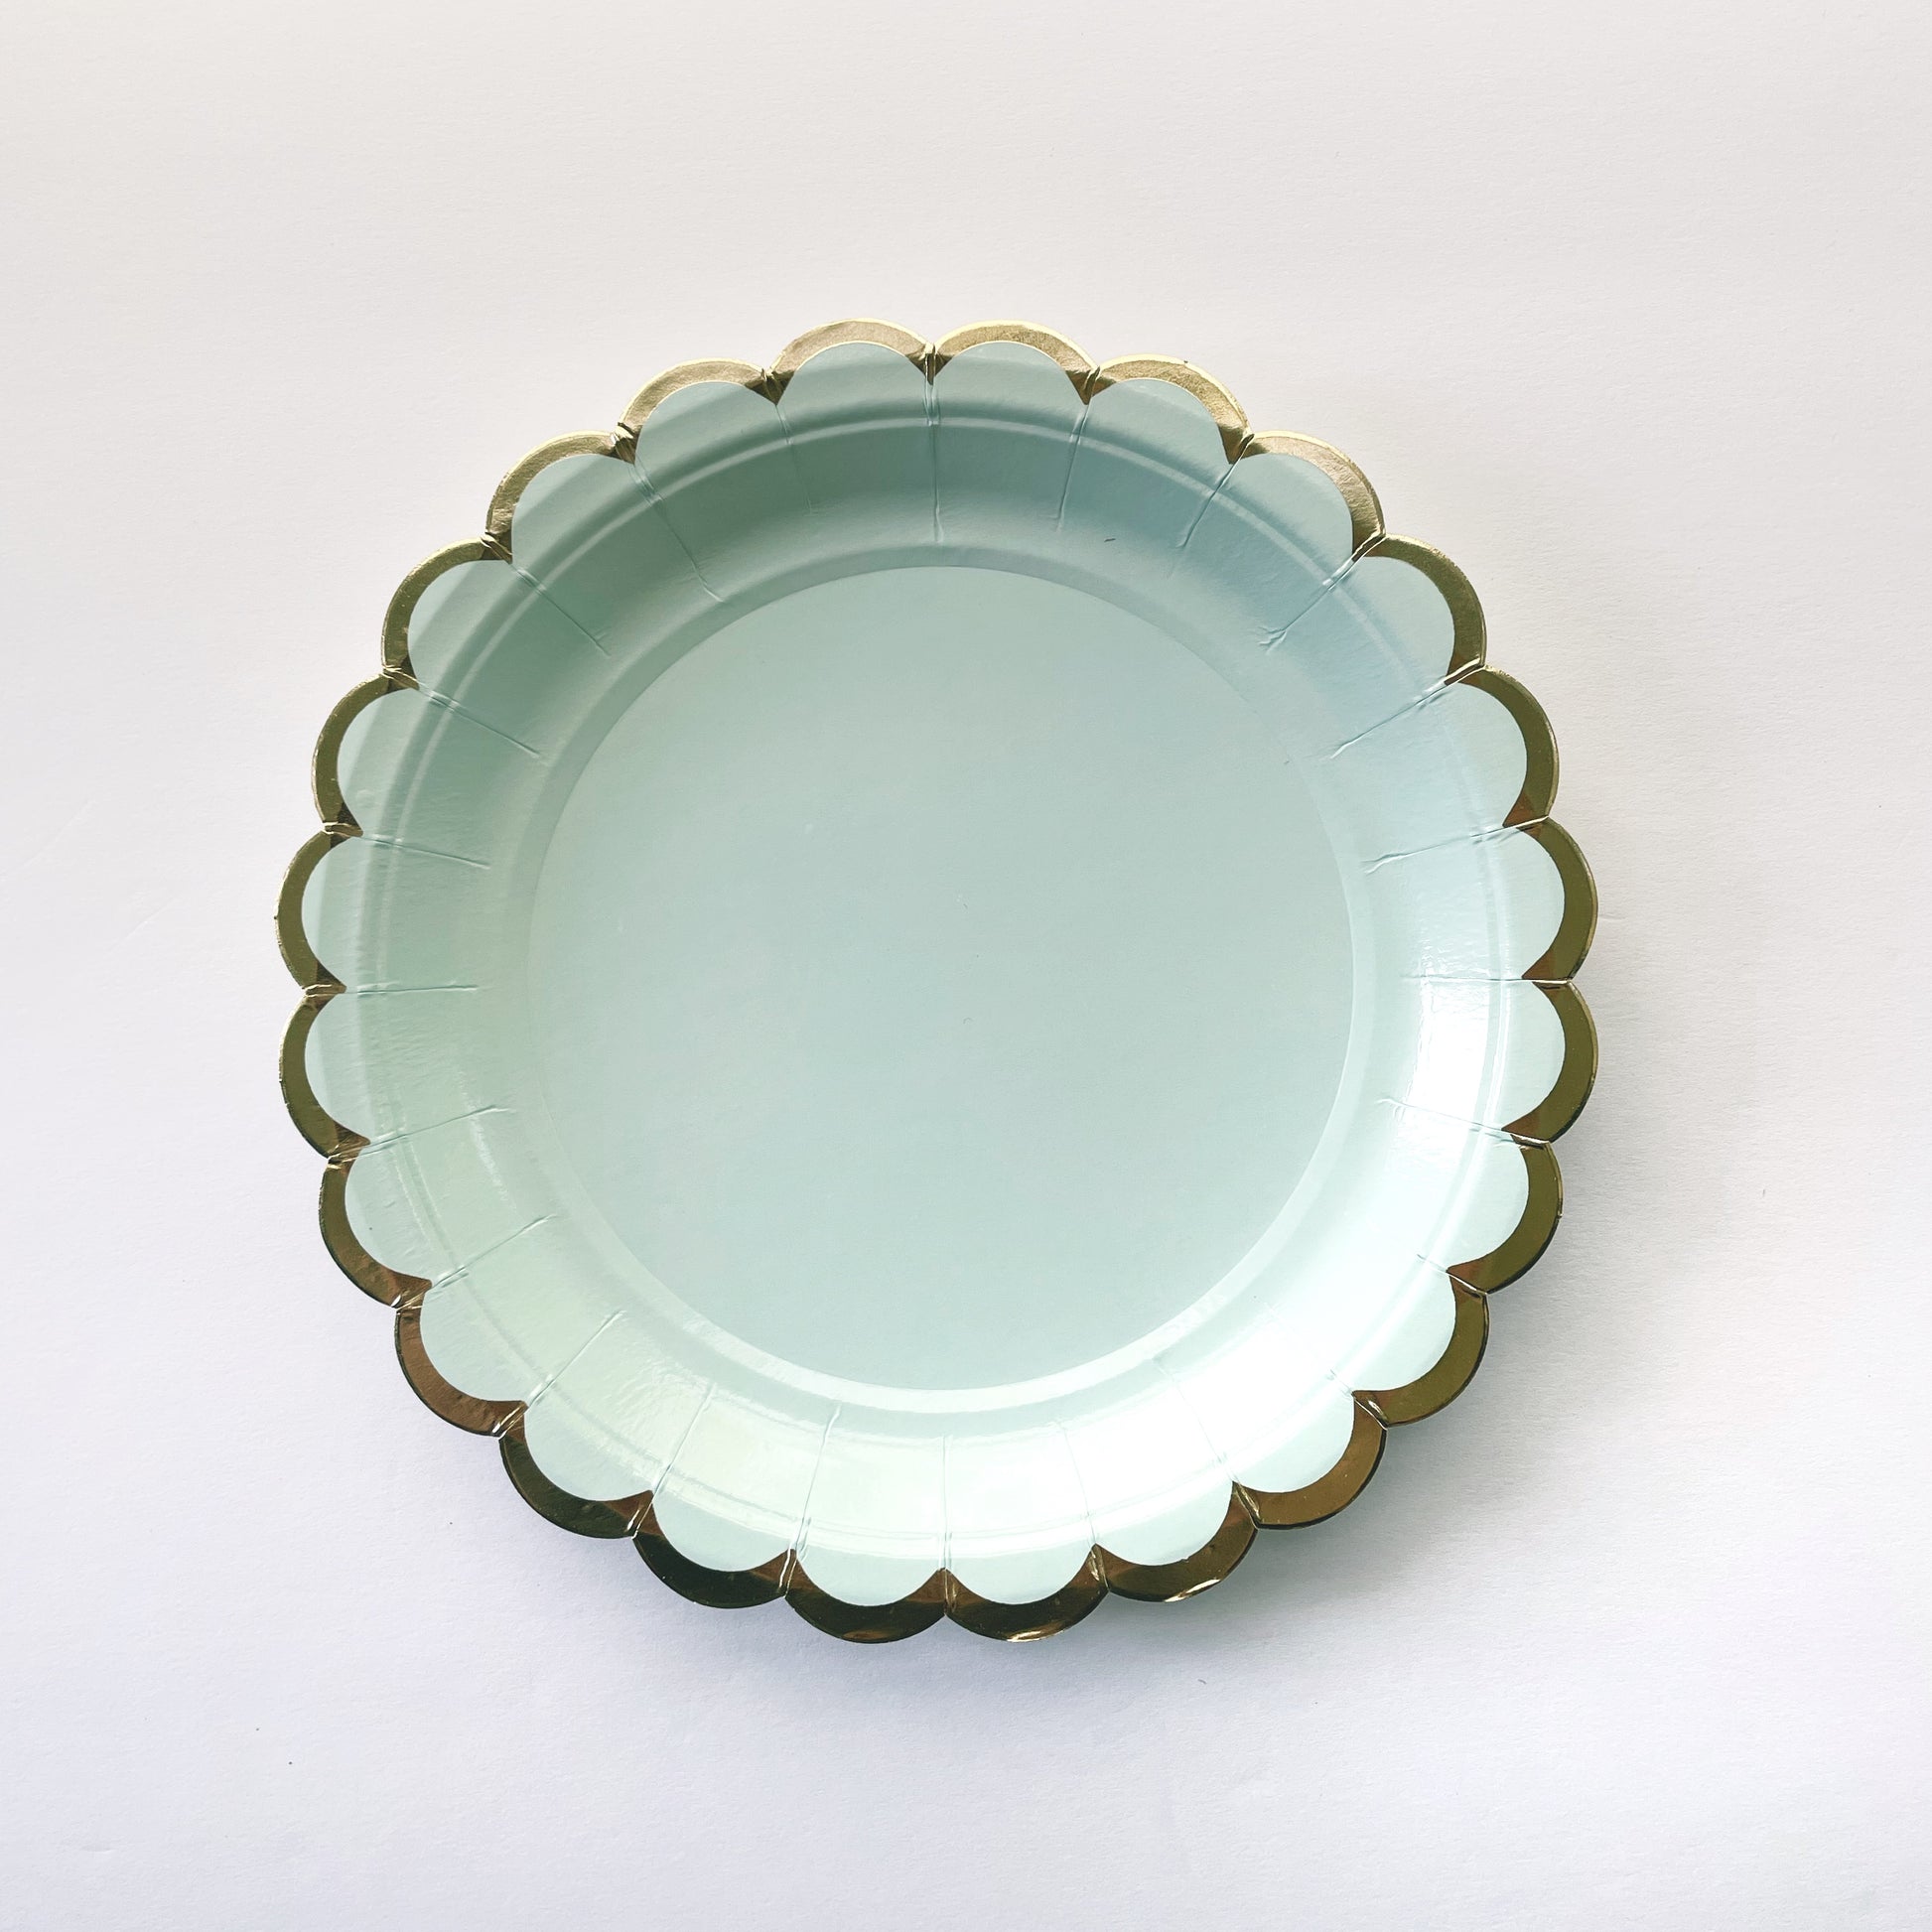 The small paper party plates are in the shape of a circle. The plates are a pale pastel blue colour with gold foil scalloped trim.